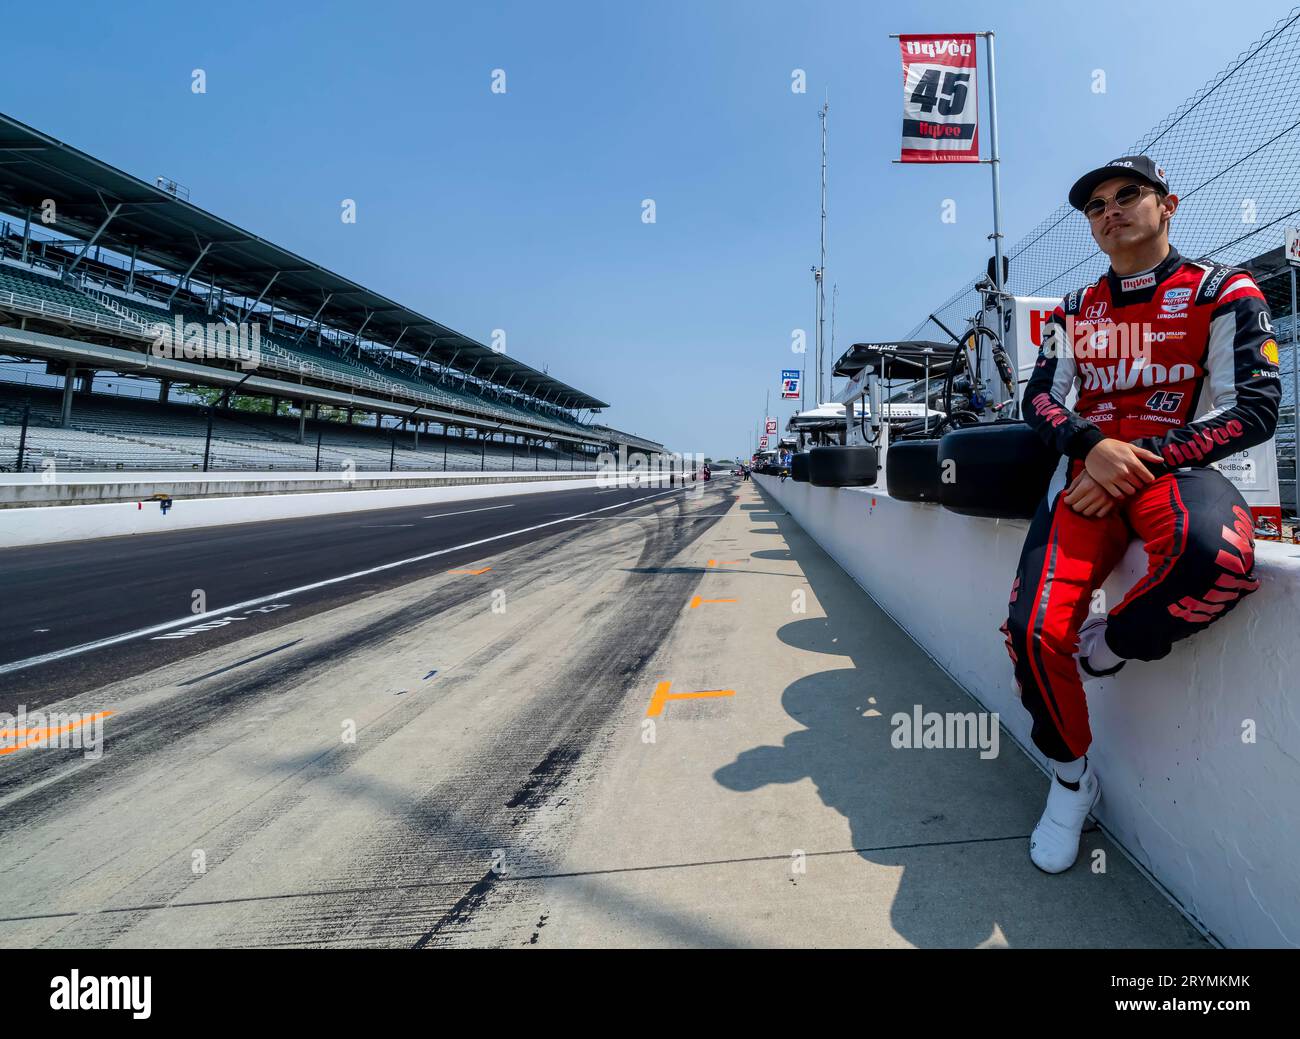 INDYCAR Series: 17 maggio Indianapols 500 Christian Lungaard Foto Stock